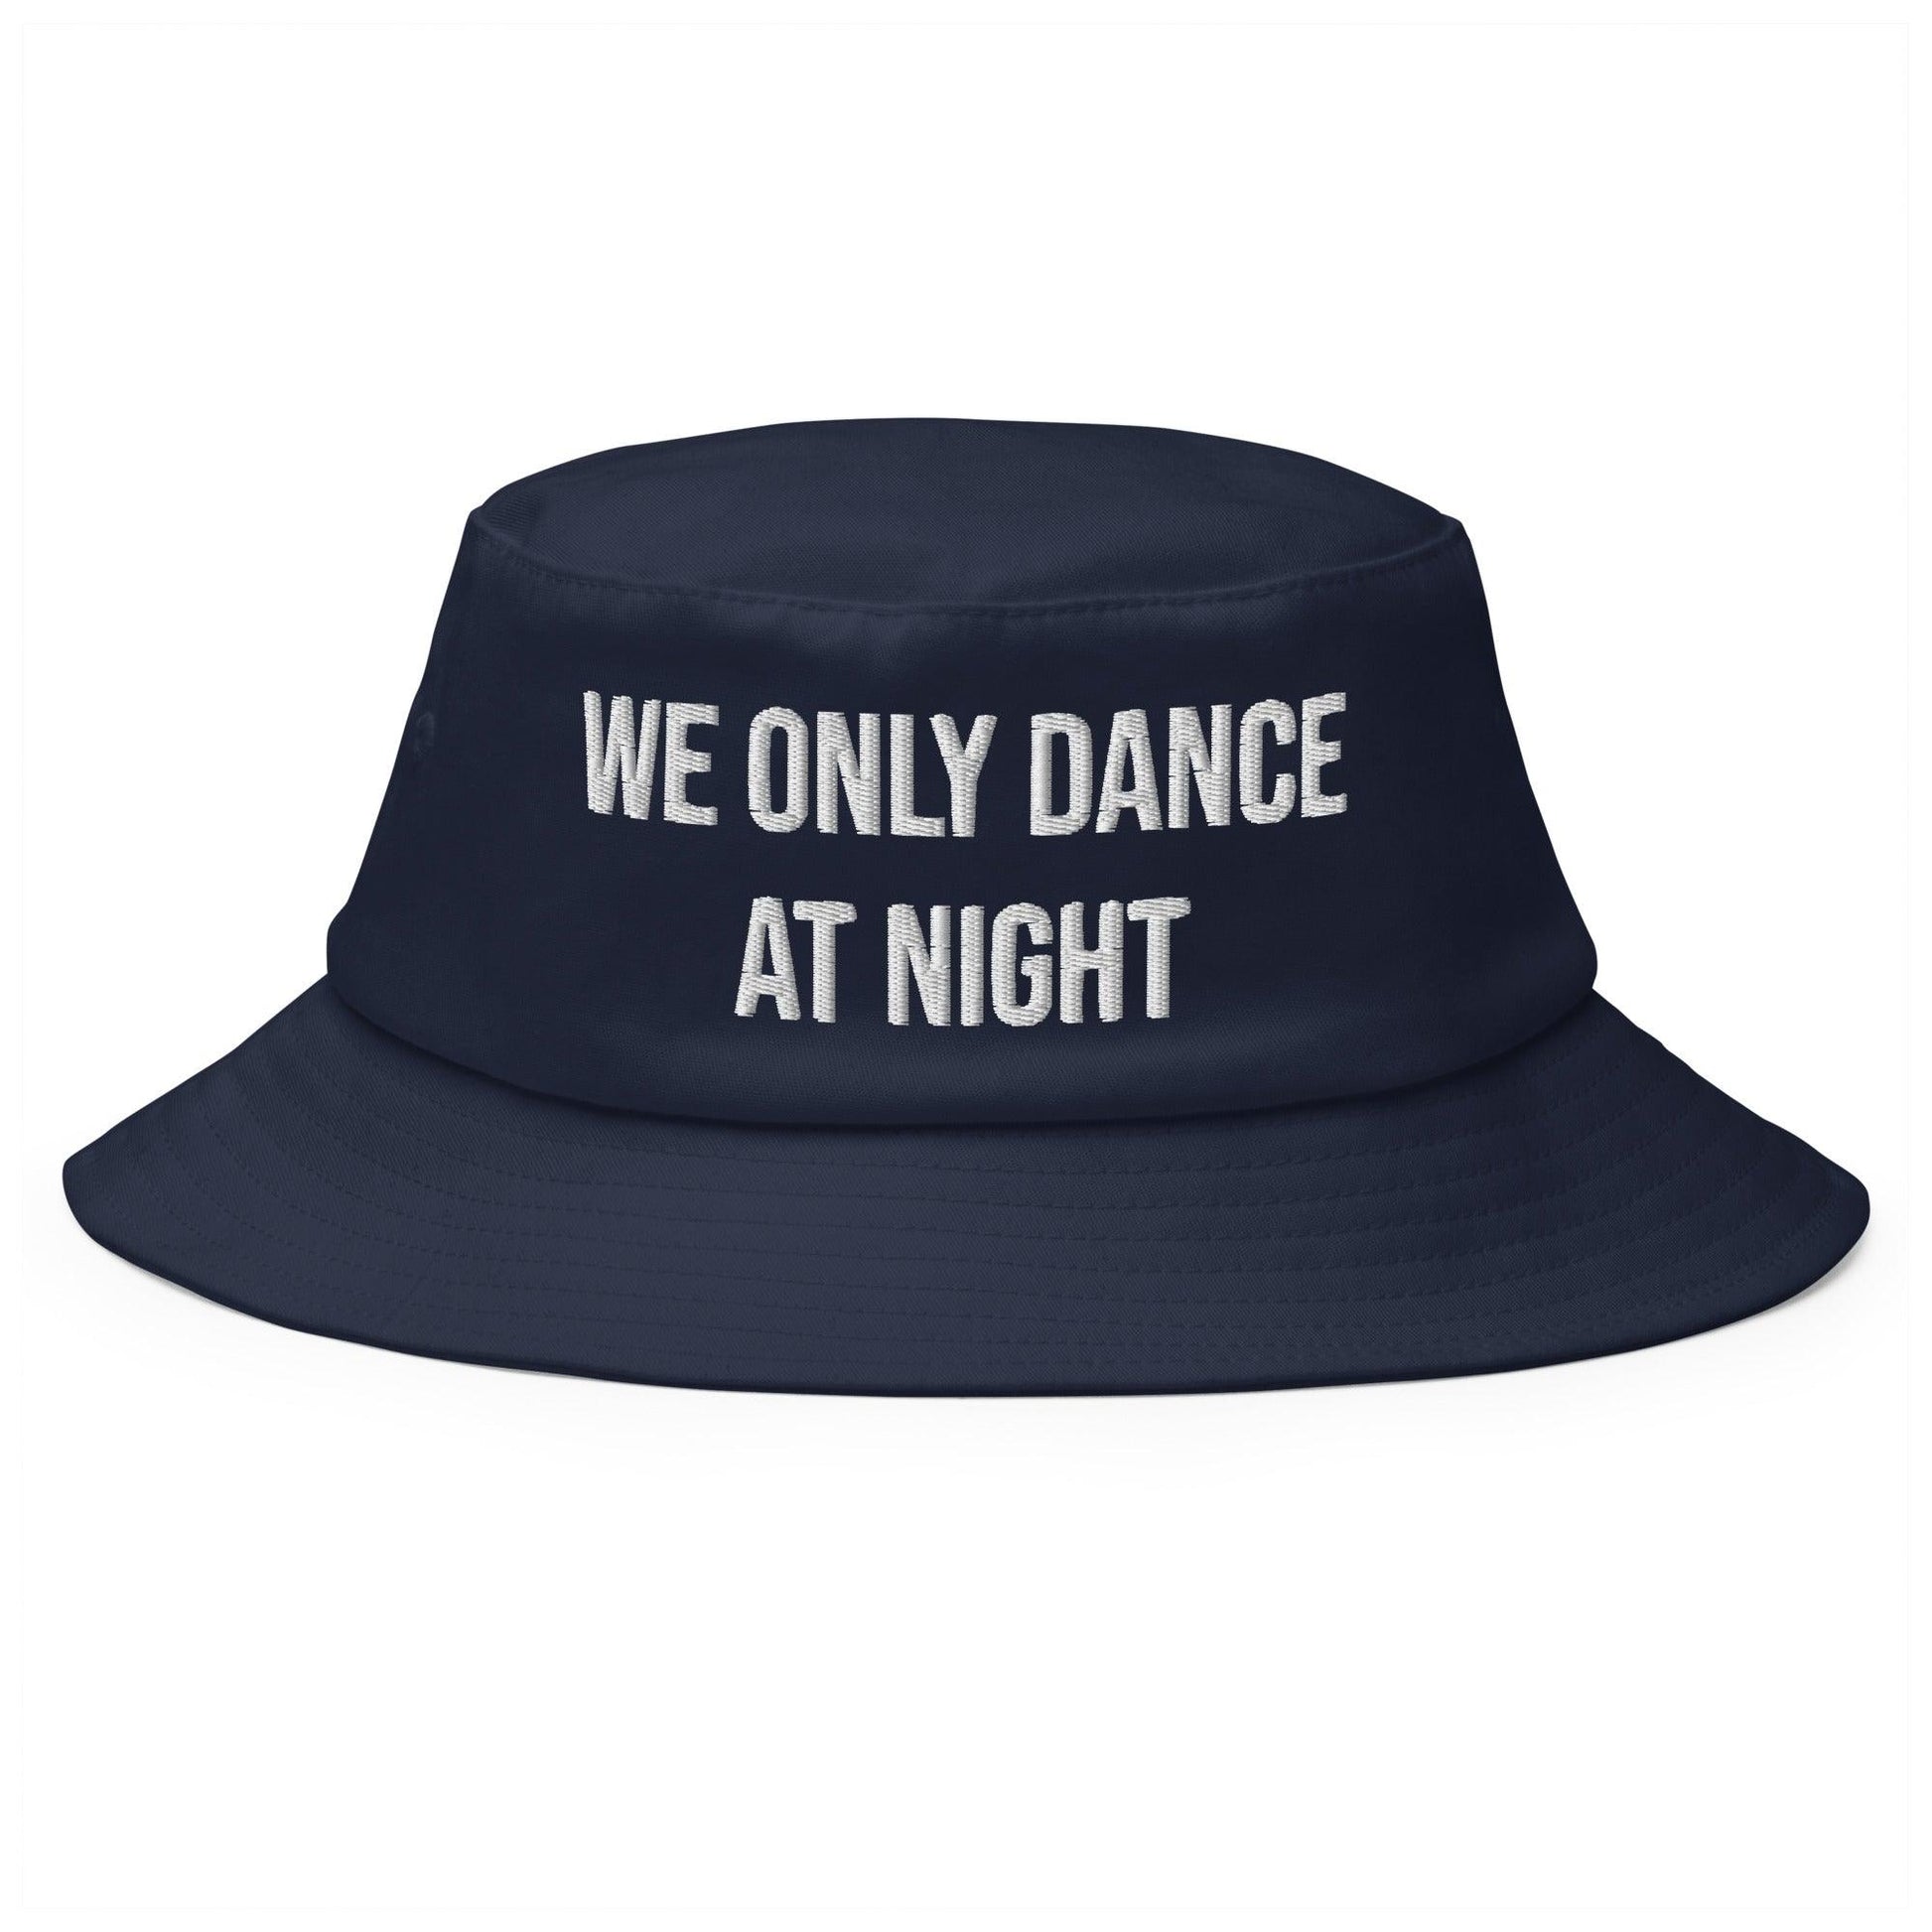 We only dance at night - Old School Bucket Hat - CatsOnDrugs